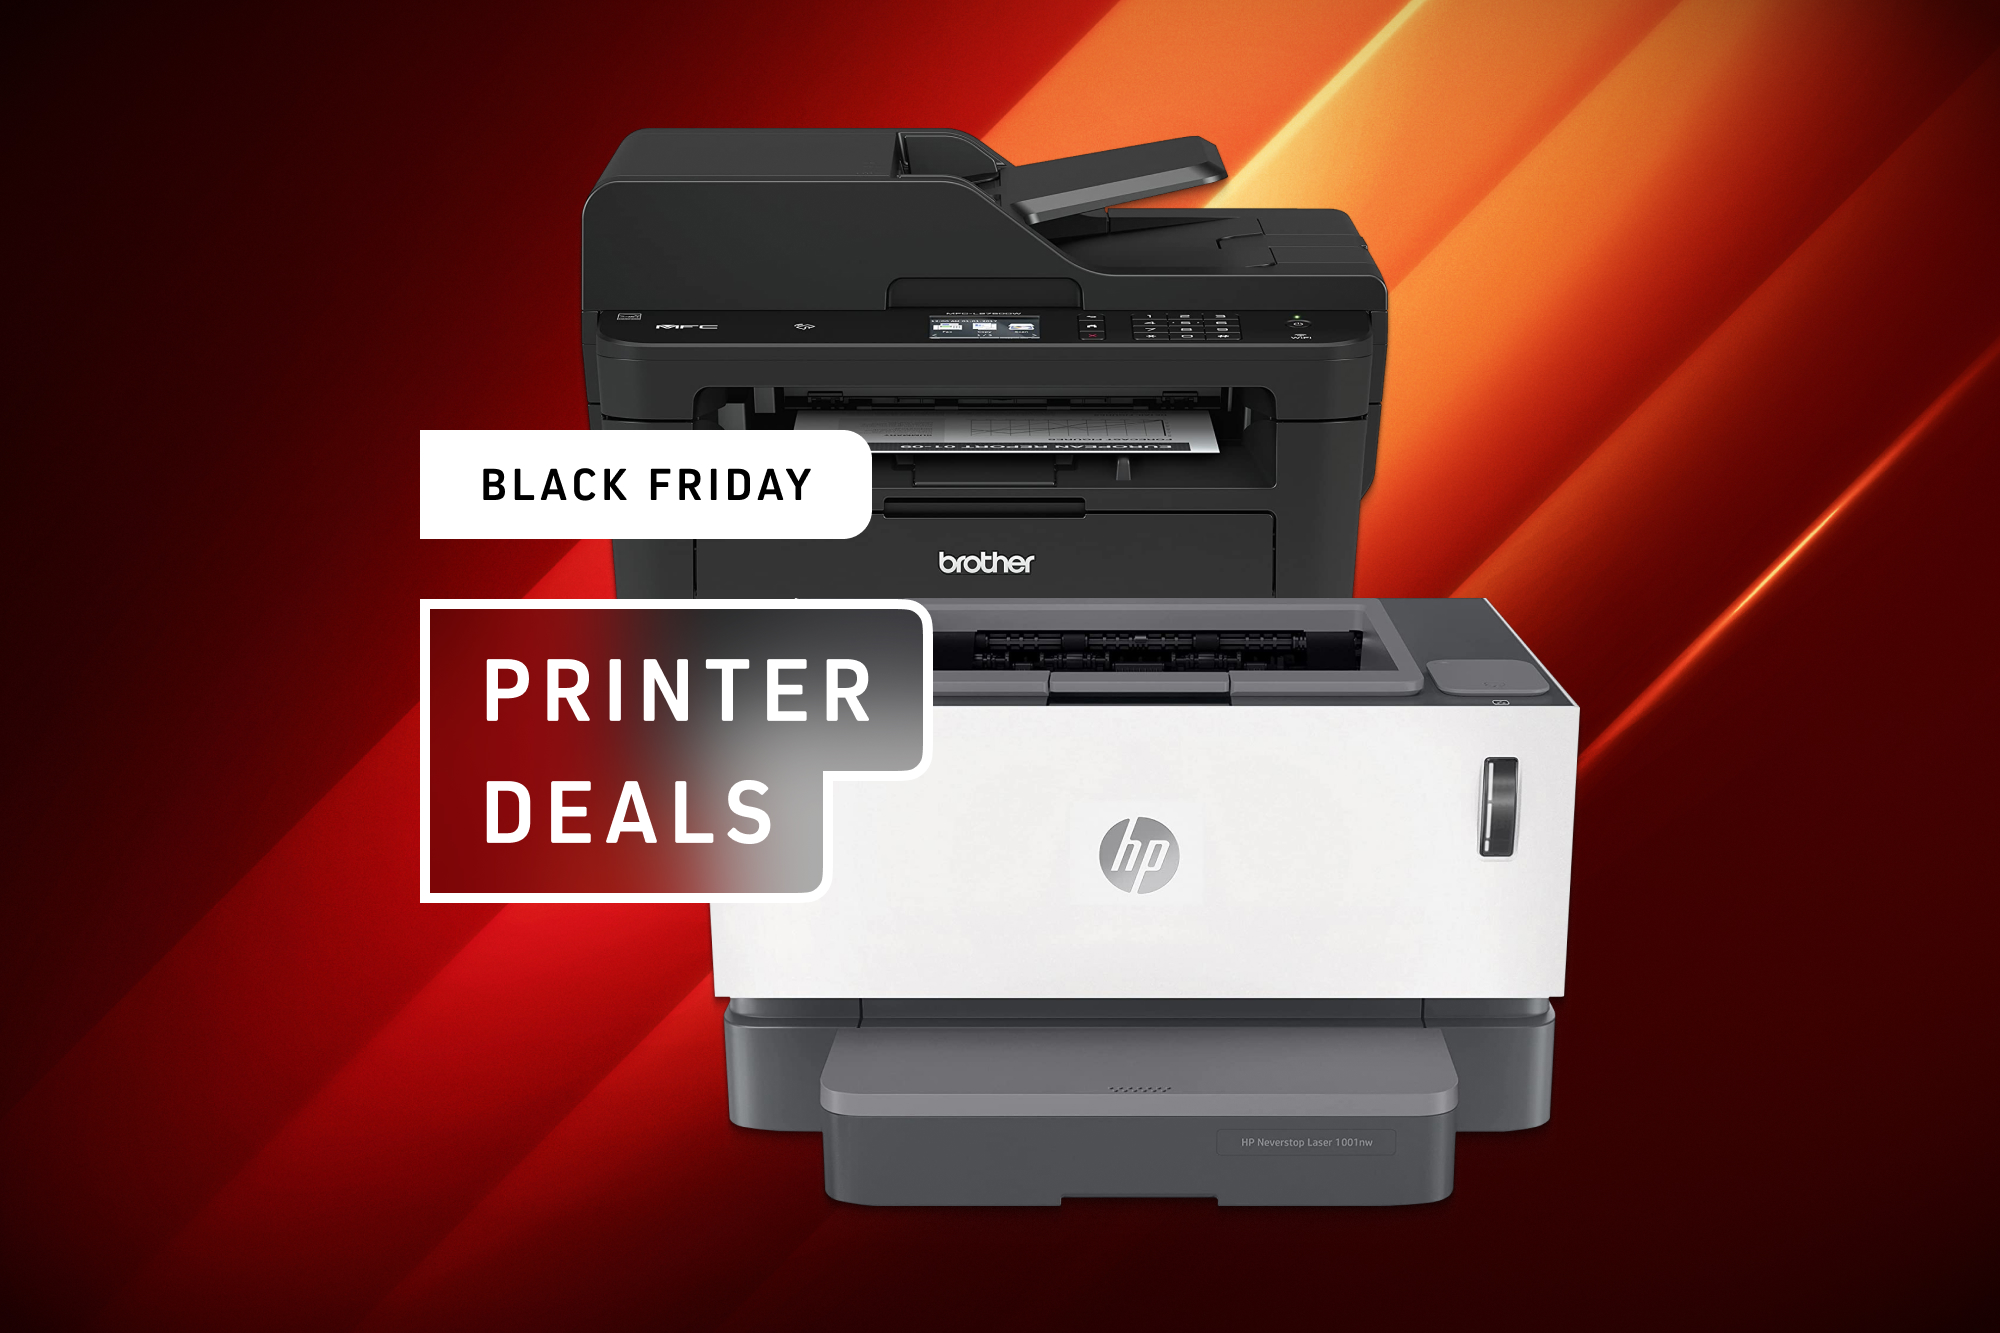 Best Black Friday Printer Deals Save on HP, Canon and Epson